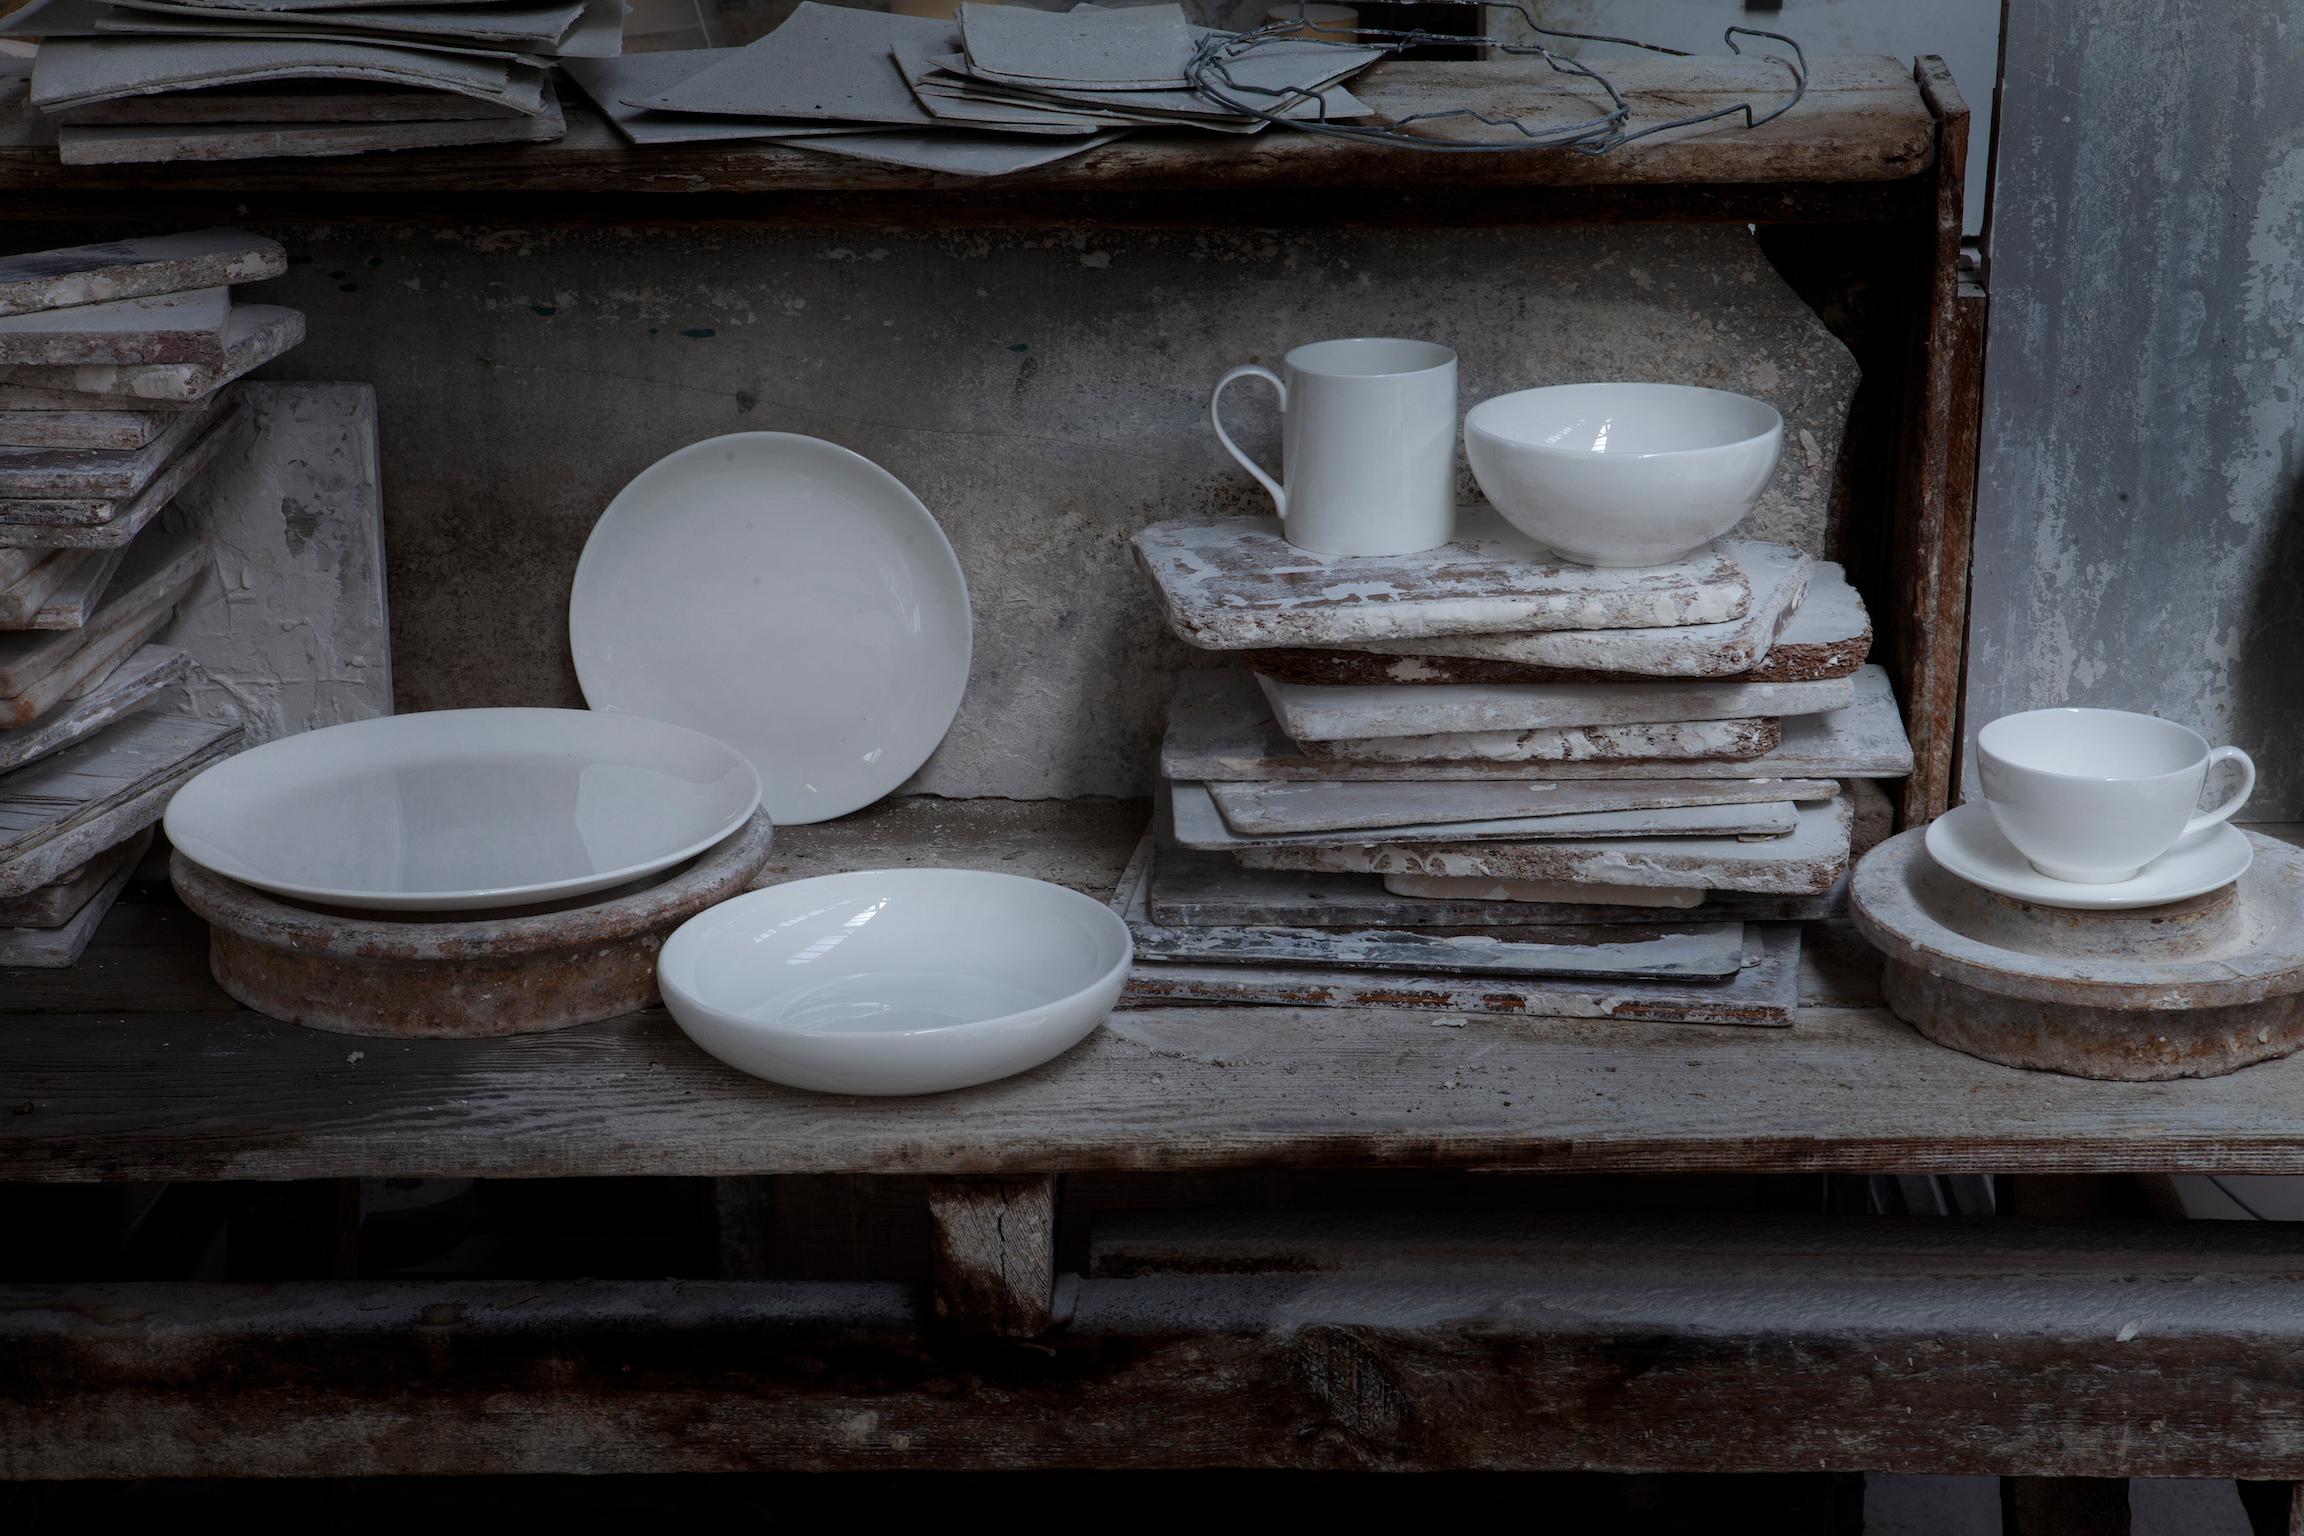 White, 1882 Ltd. The purist fine bone china tableware. Designed by Chris Johnson and made in Stoke-on-Trent. This forms the base of all our collections and the most wonderful foundation for any table.
 